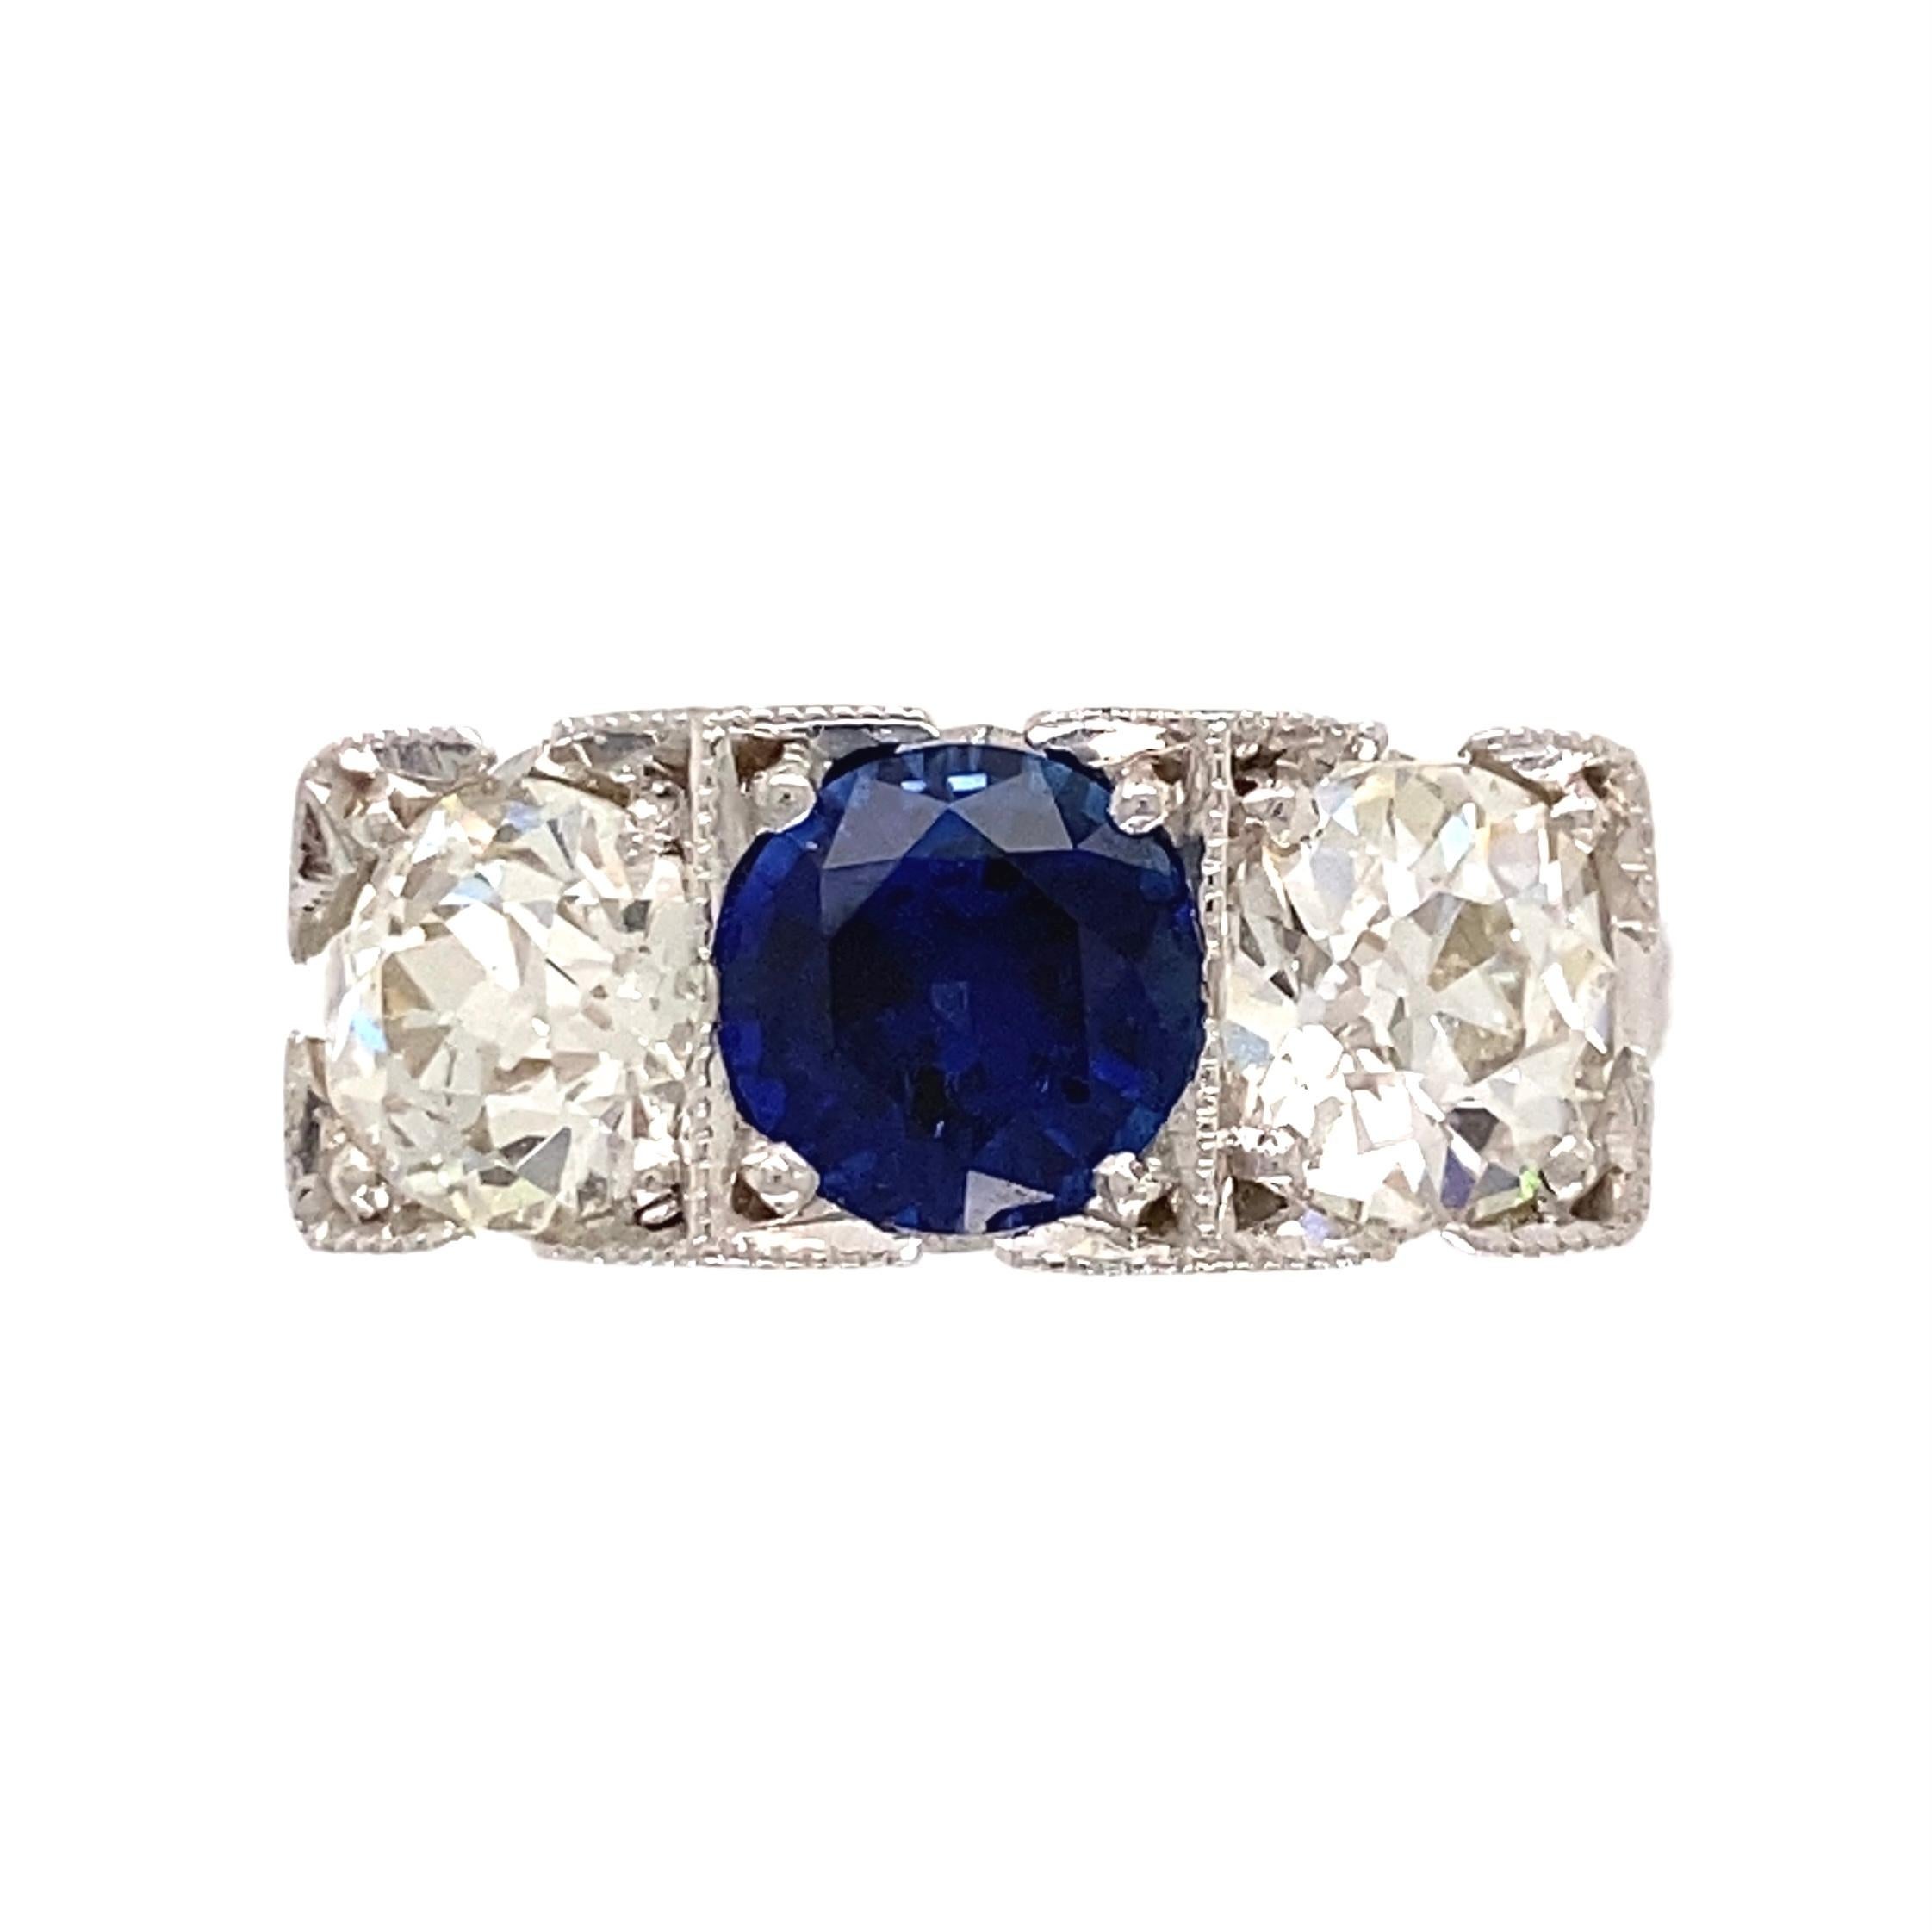 Mixed Cut Sapphire and Diamond Art Deco Revival 3-Stone Gold Ring Estate Fine Jewelry For Sale